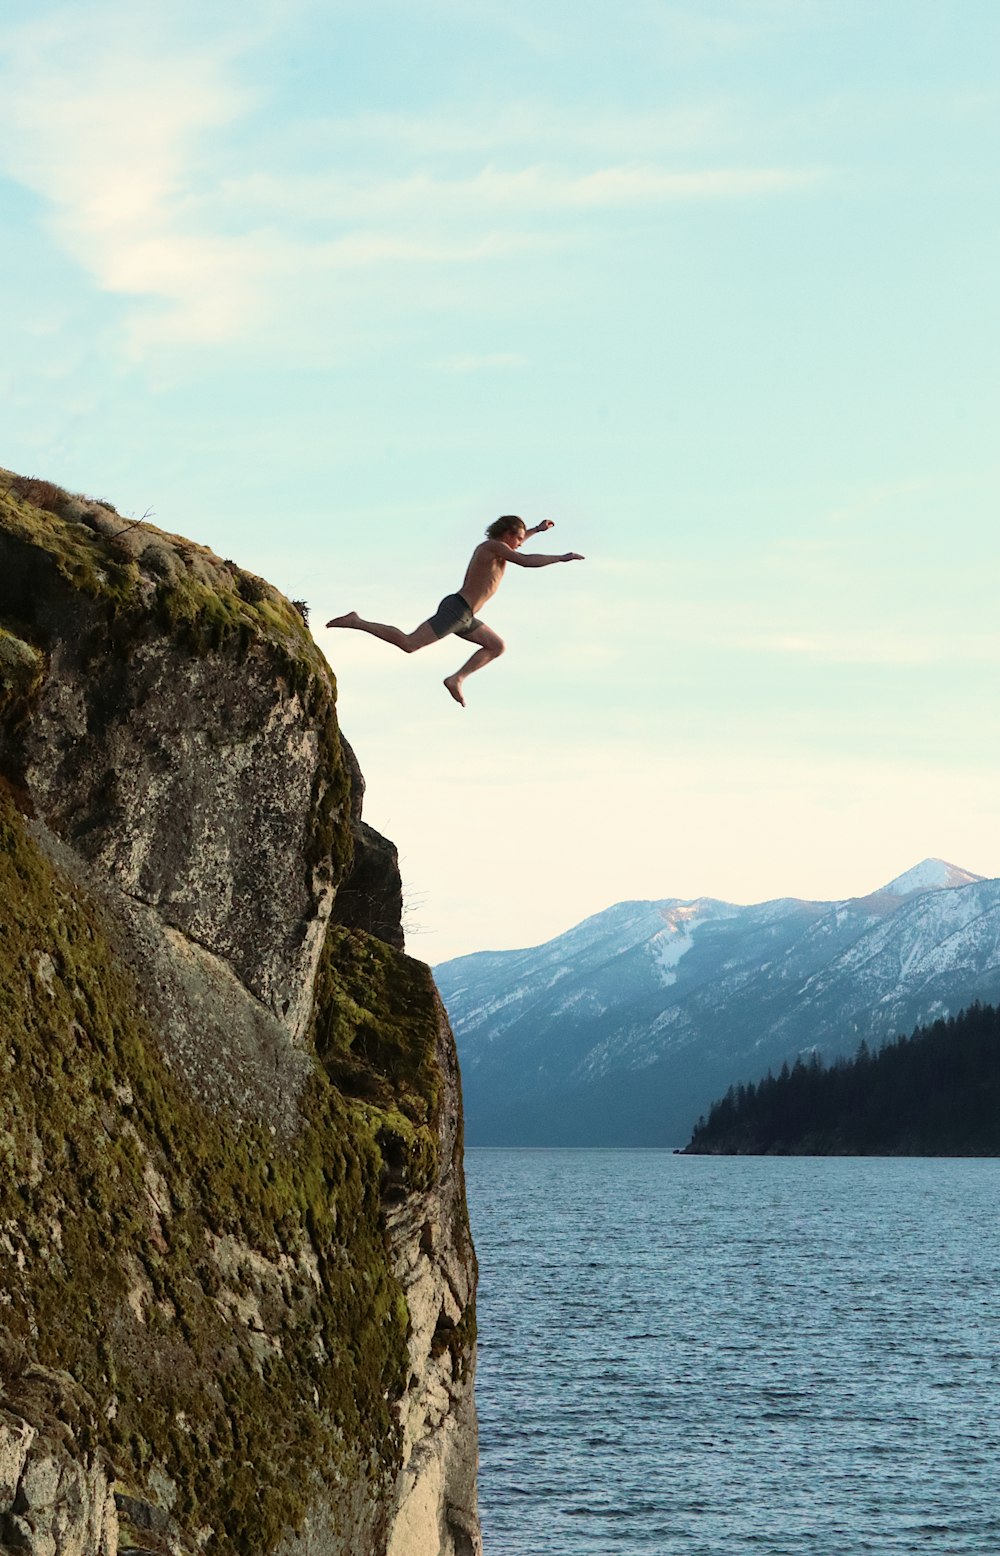 a person jumping off a cliff into a body of water